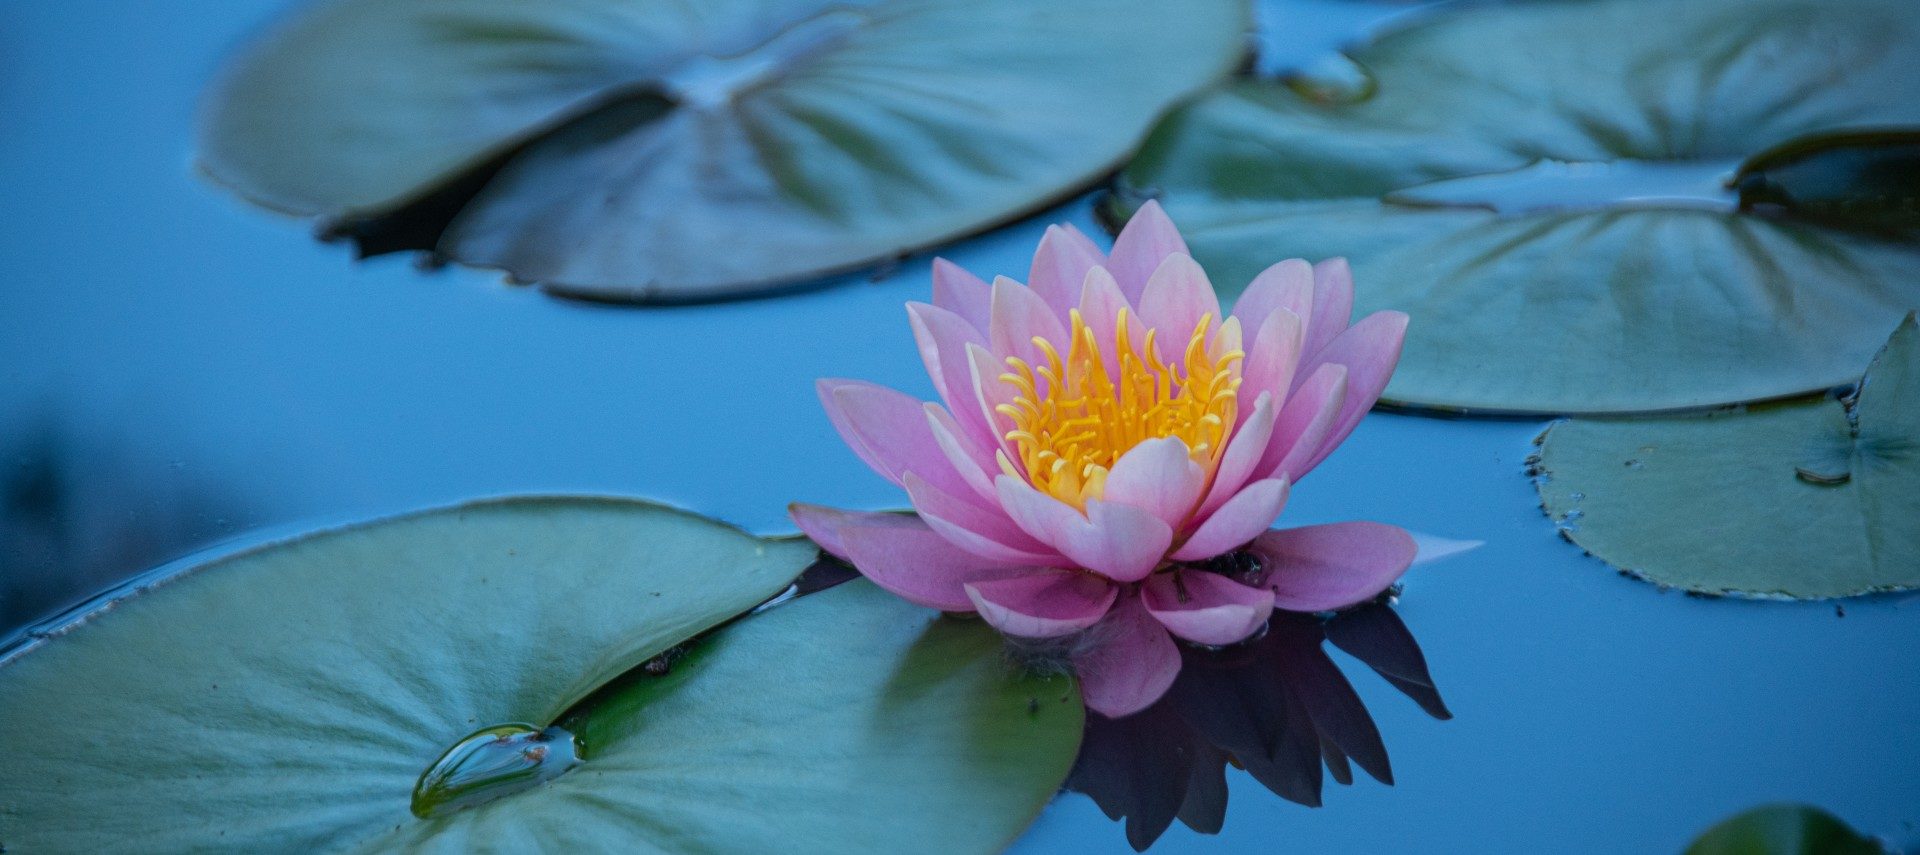 Green lily pads in water with one yellow and pink flower floating